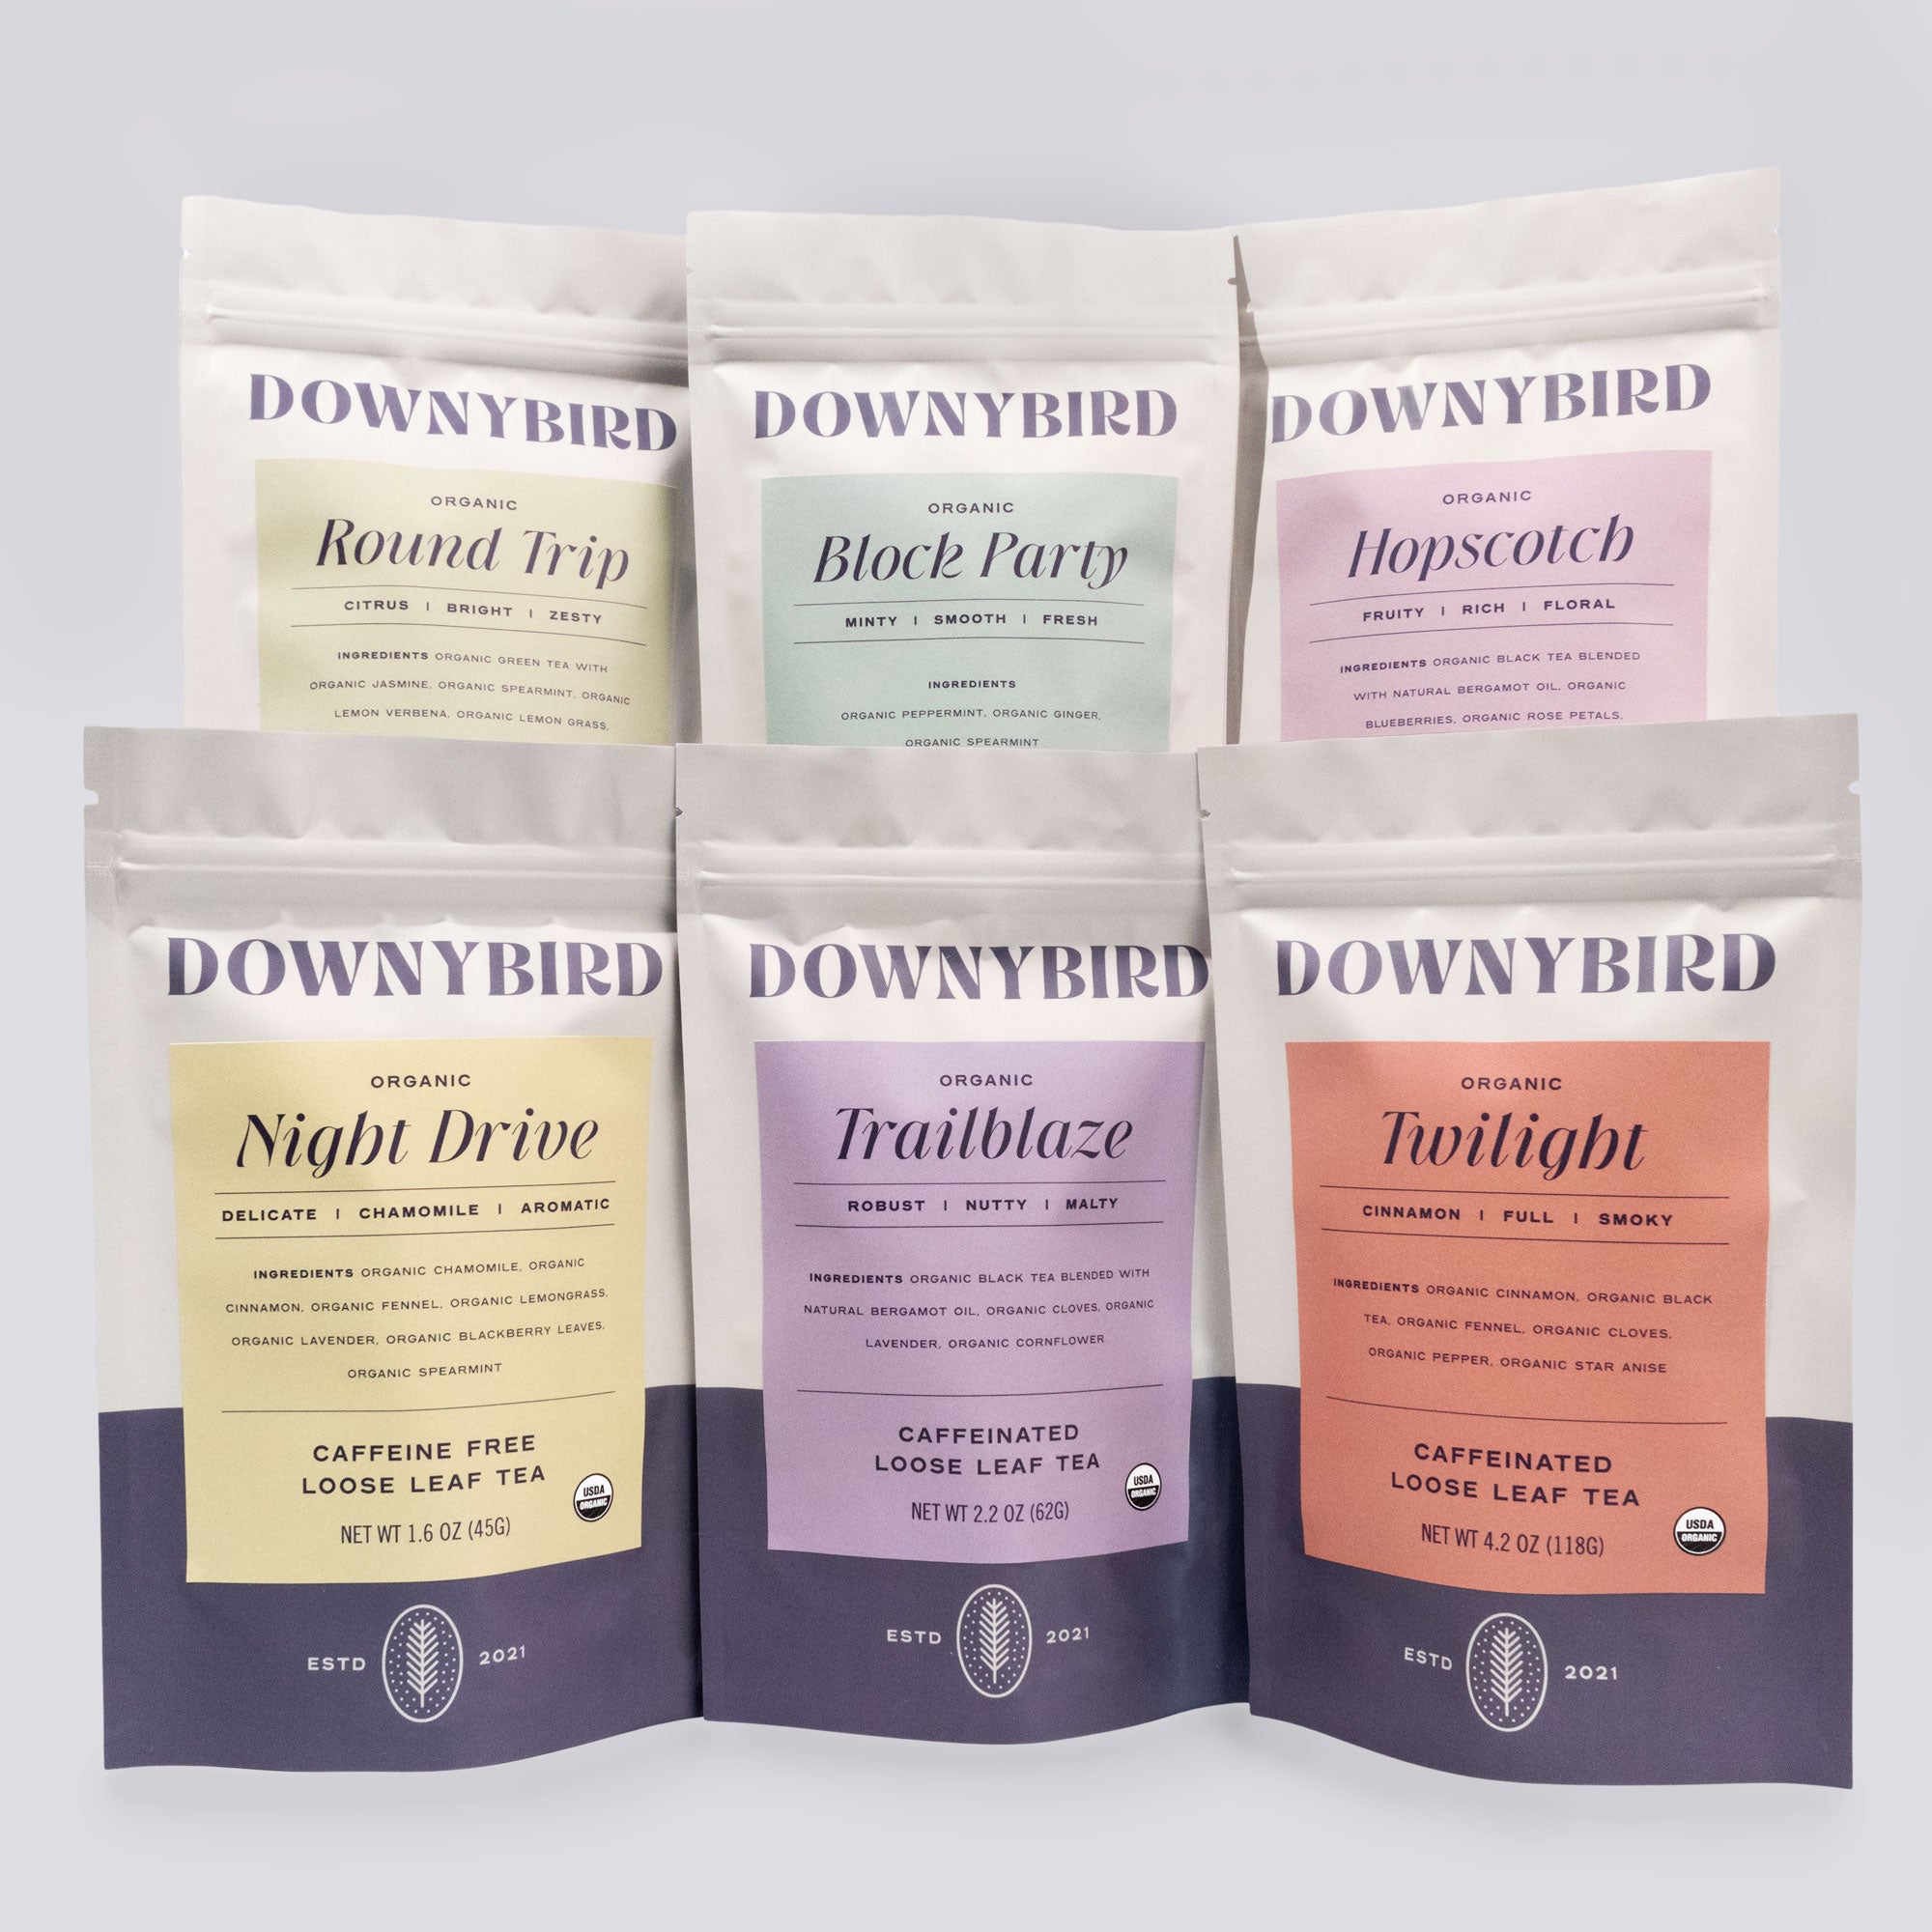 Complete Collection of Downybird Organic Loose Leaf Tea Blends